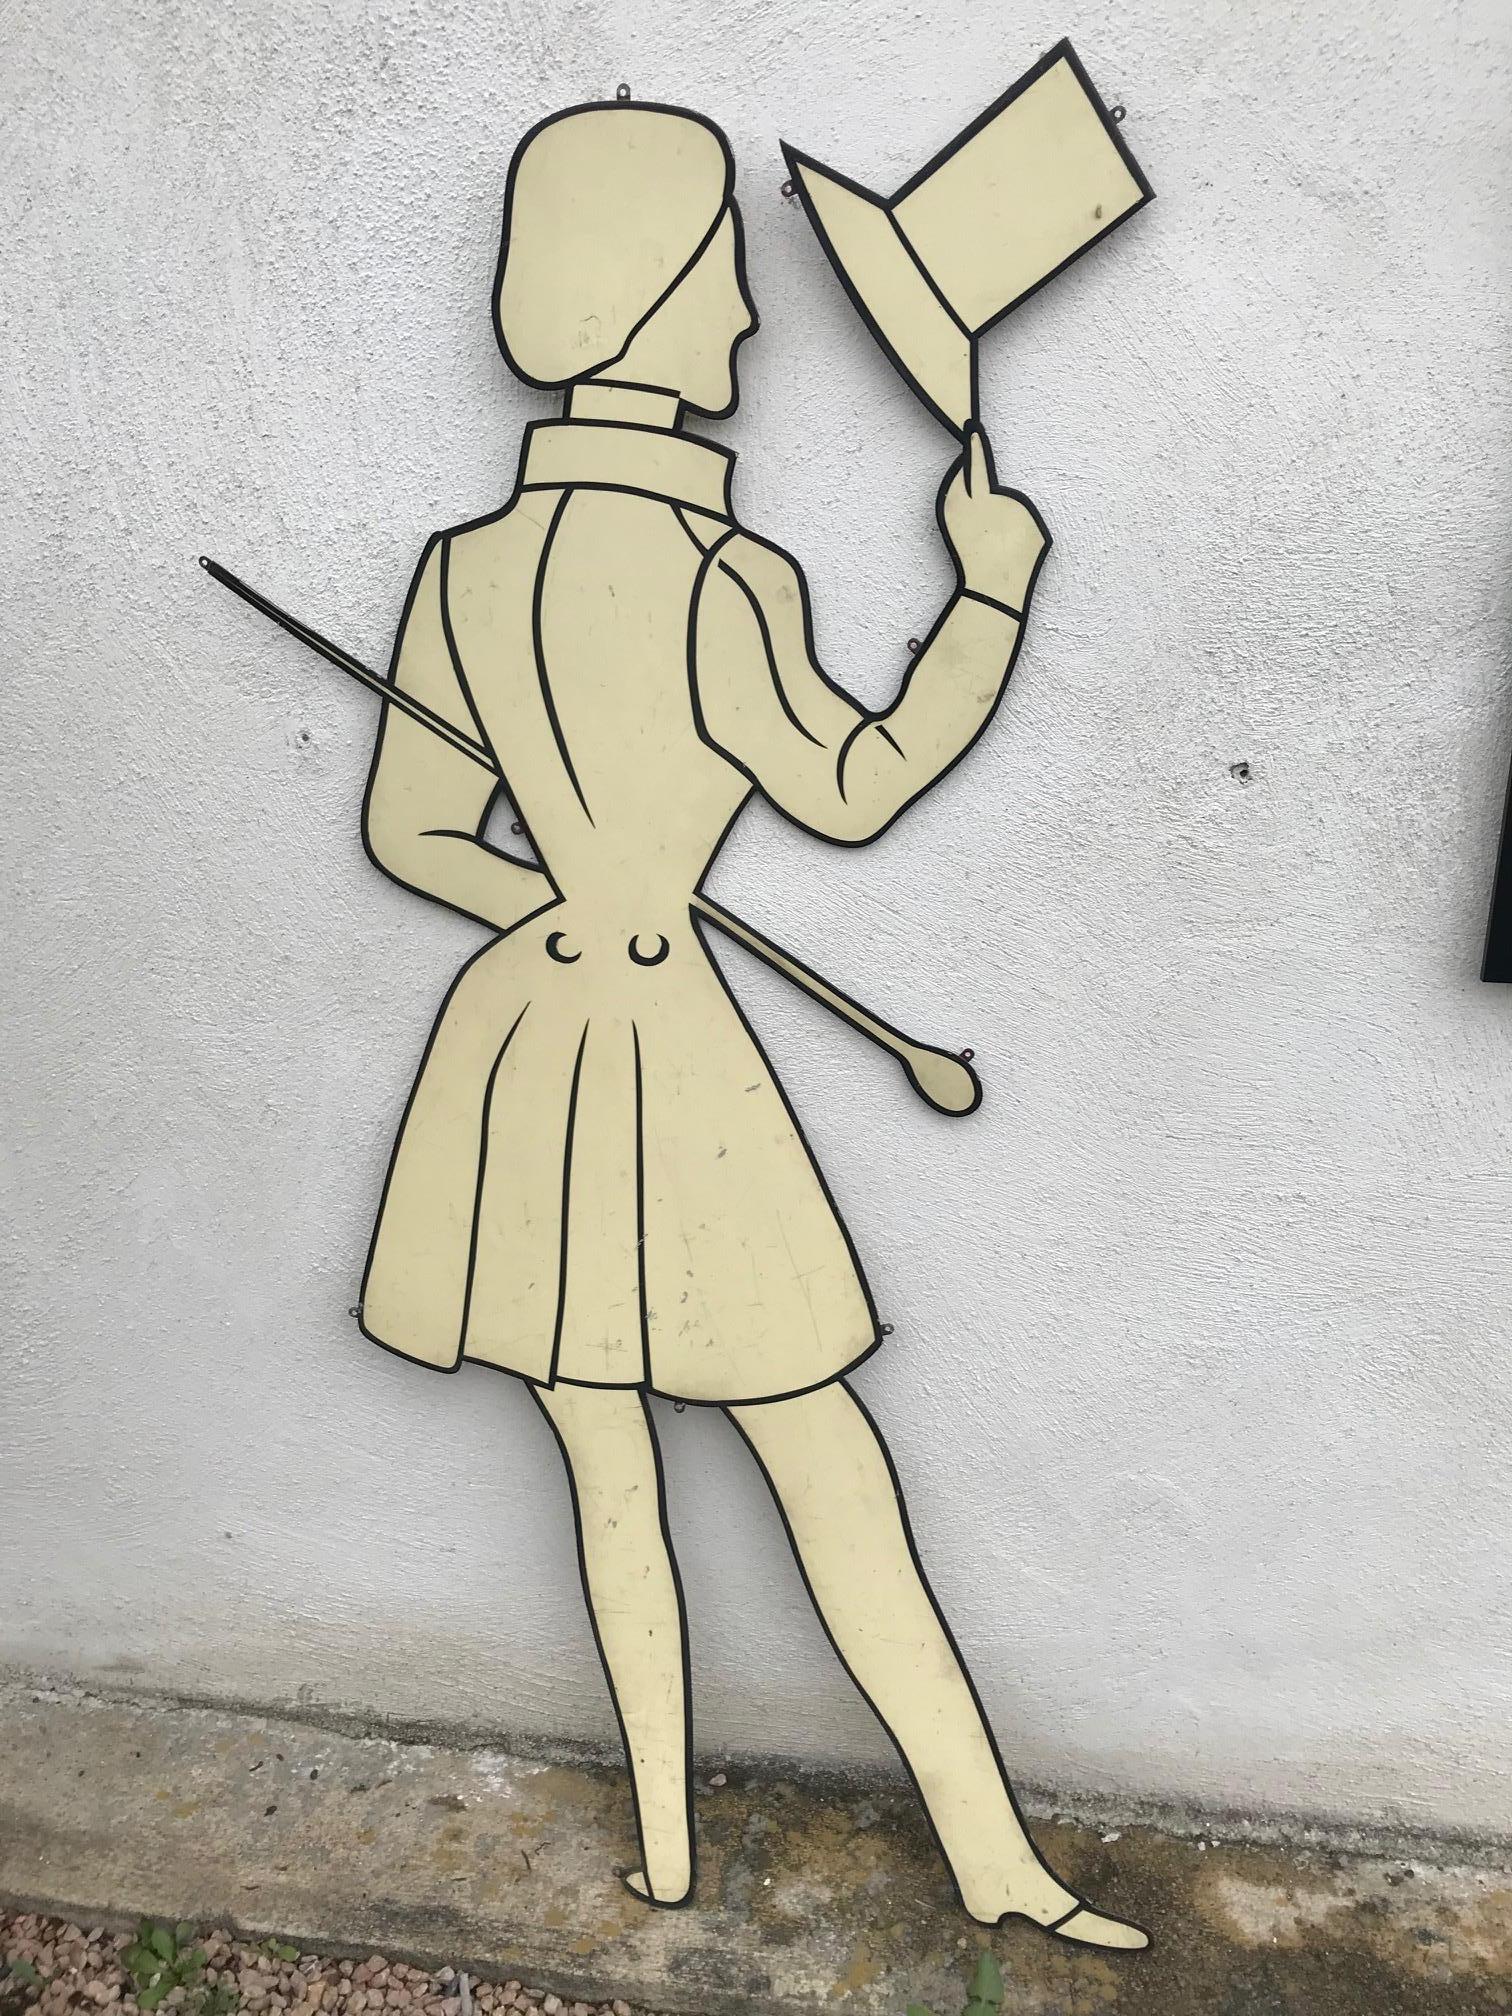 Very nice and rare 20th century French male metal silhouette from the 1950s.
This exceptional sign was used in a clothes shop.
We can see a man with a cane under the arm, a long jacket and a top hat.
There are small holes in the metal to hook the